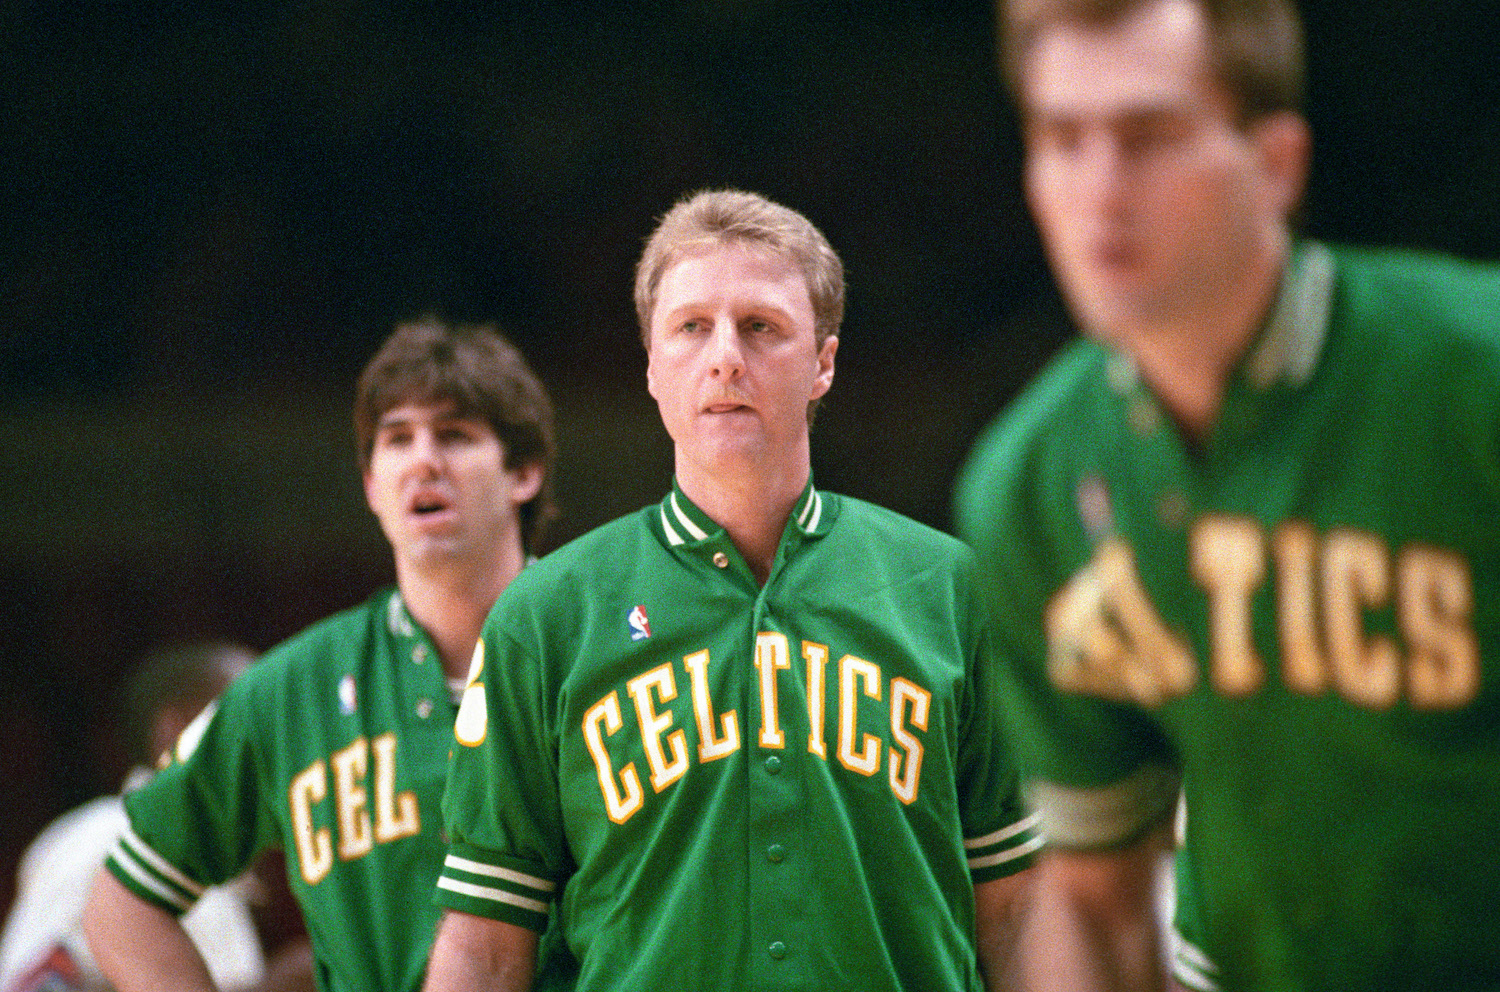 Larry Bird, who was battling back problems at that point of his career, warms up ahead of a 1988 Boston Celtics game.